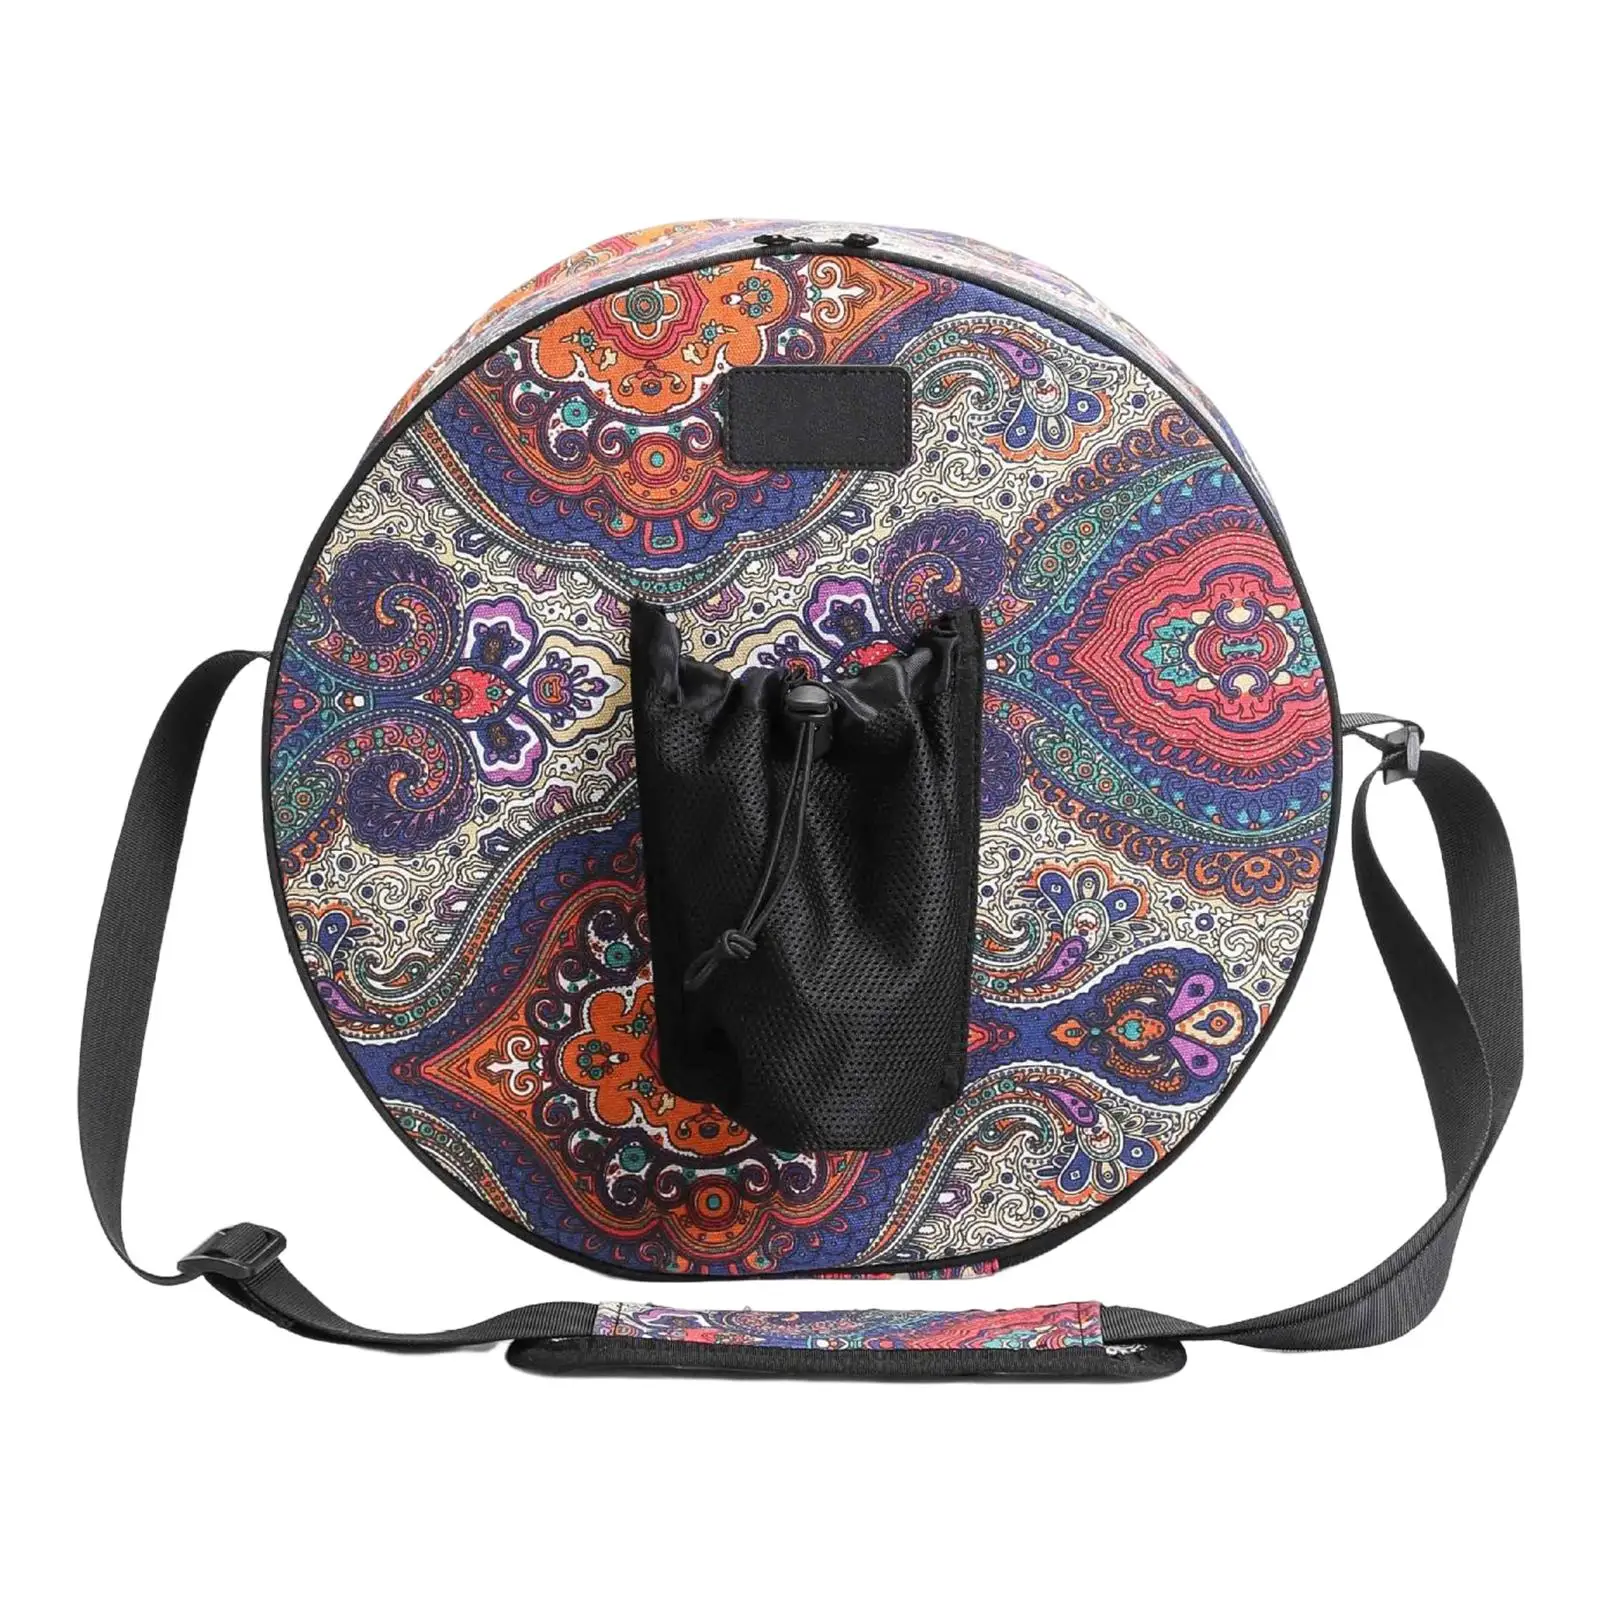 Canvas Wheel Bag Fitness with Zippers Pilates with Adjustable Strap Dharma Wheel Tool Carrying Tote Yoga Towel Backpack